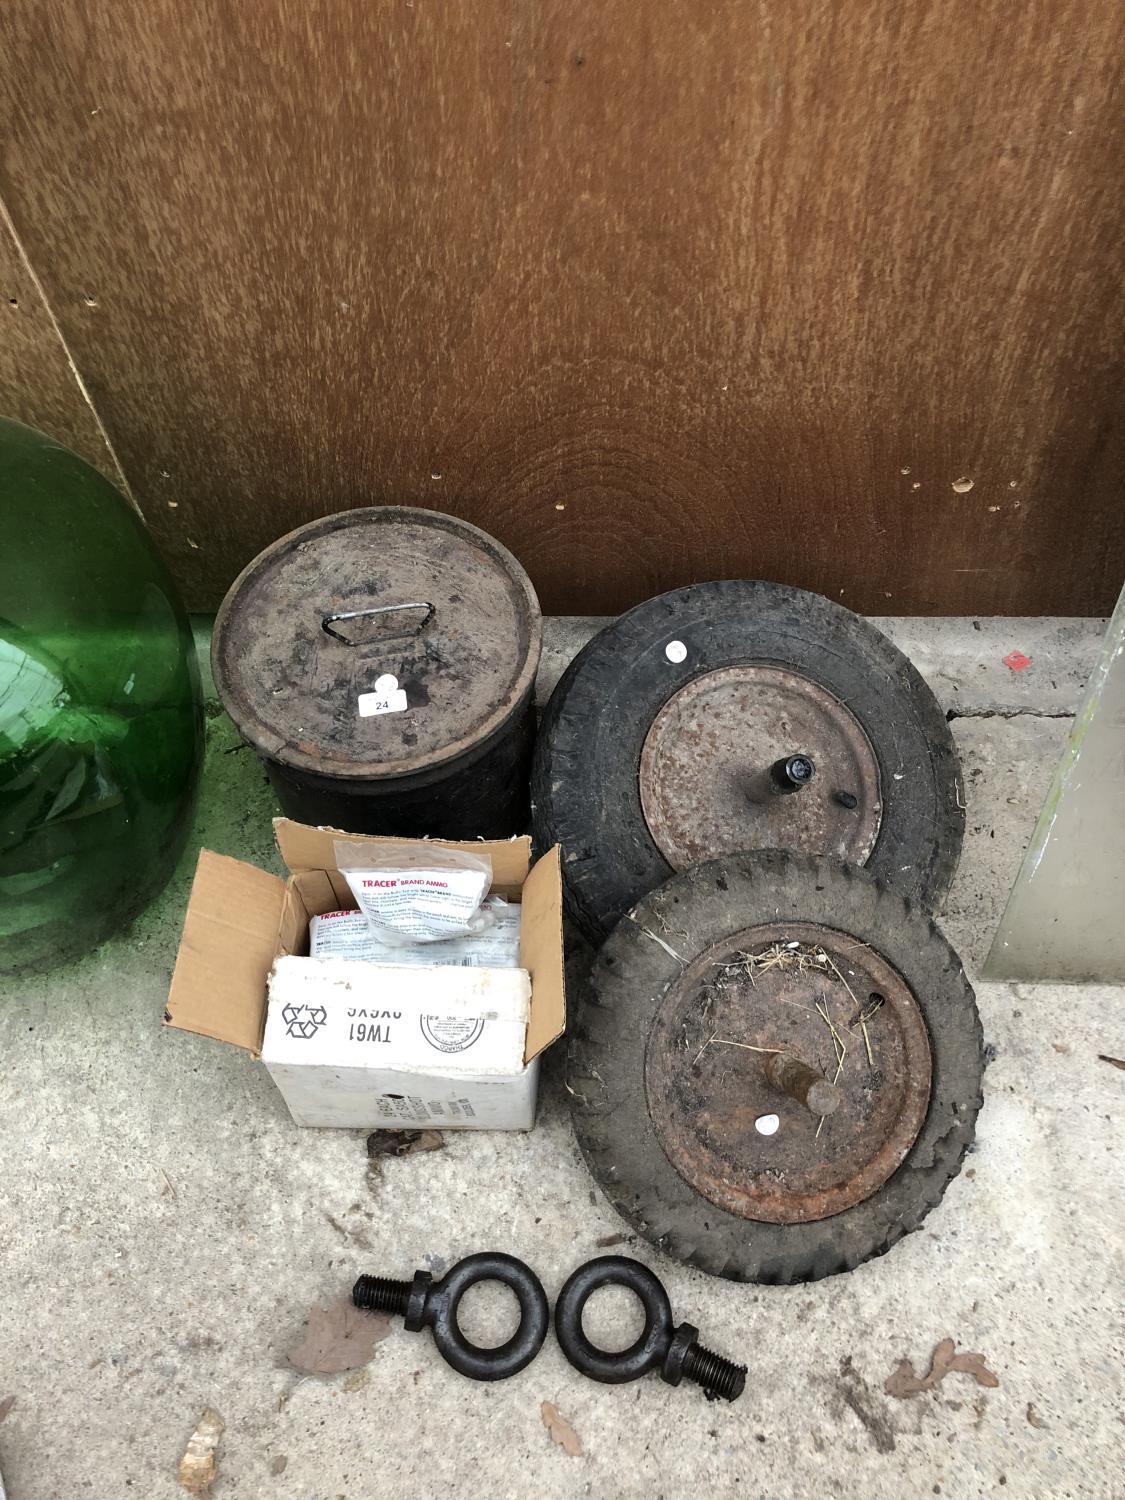 MIXED ITEMS - TWO WHEELS AND TYRES, TUB ETC